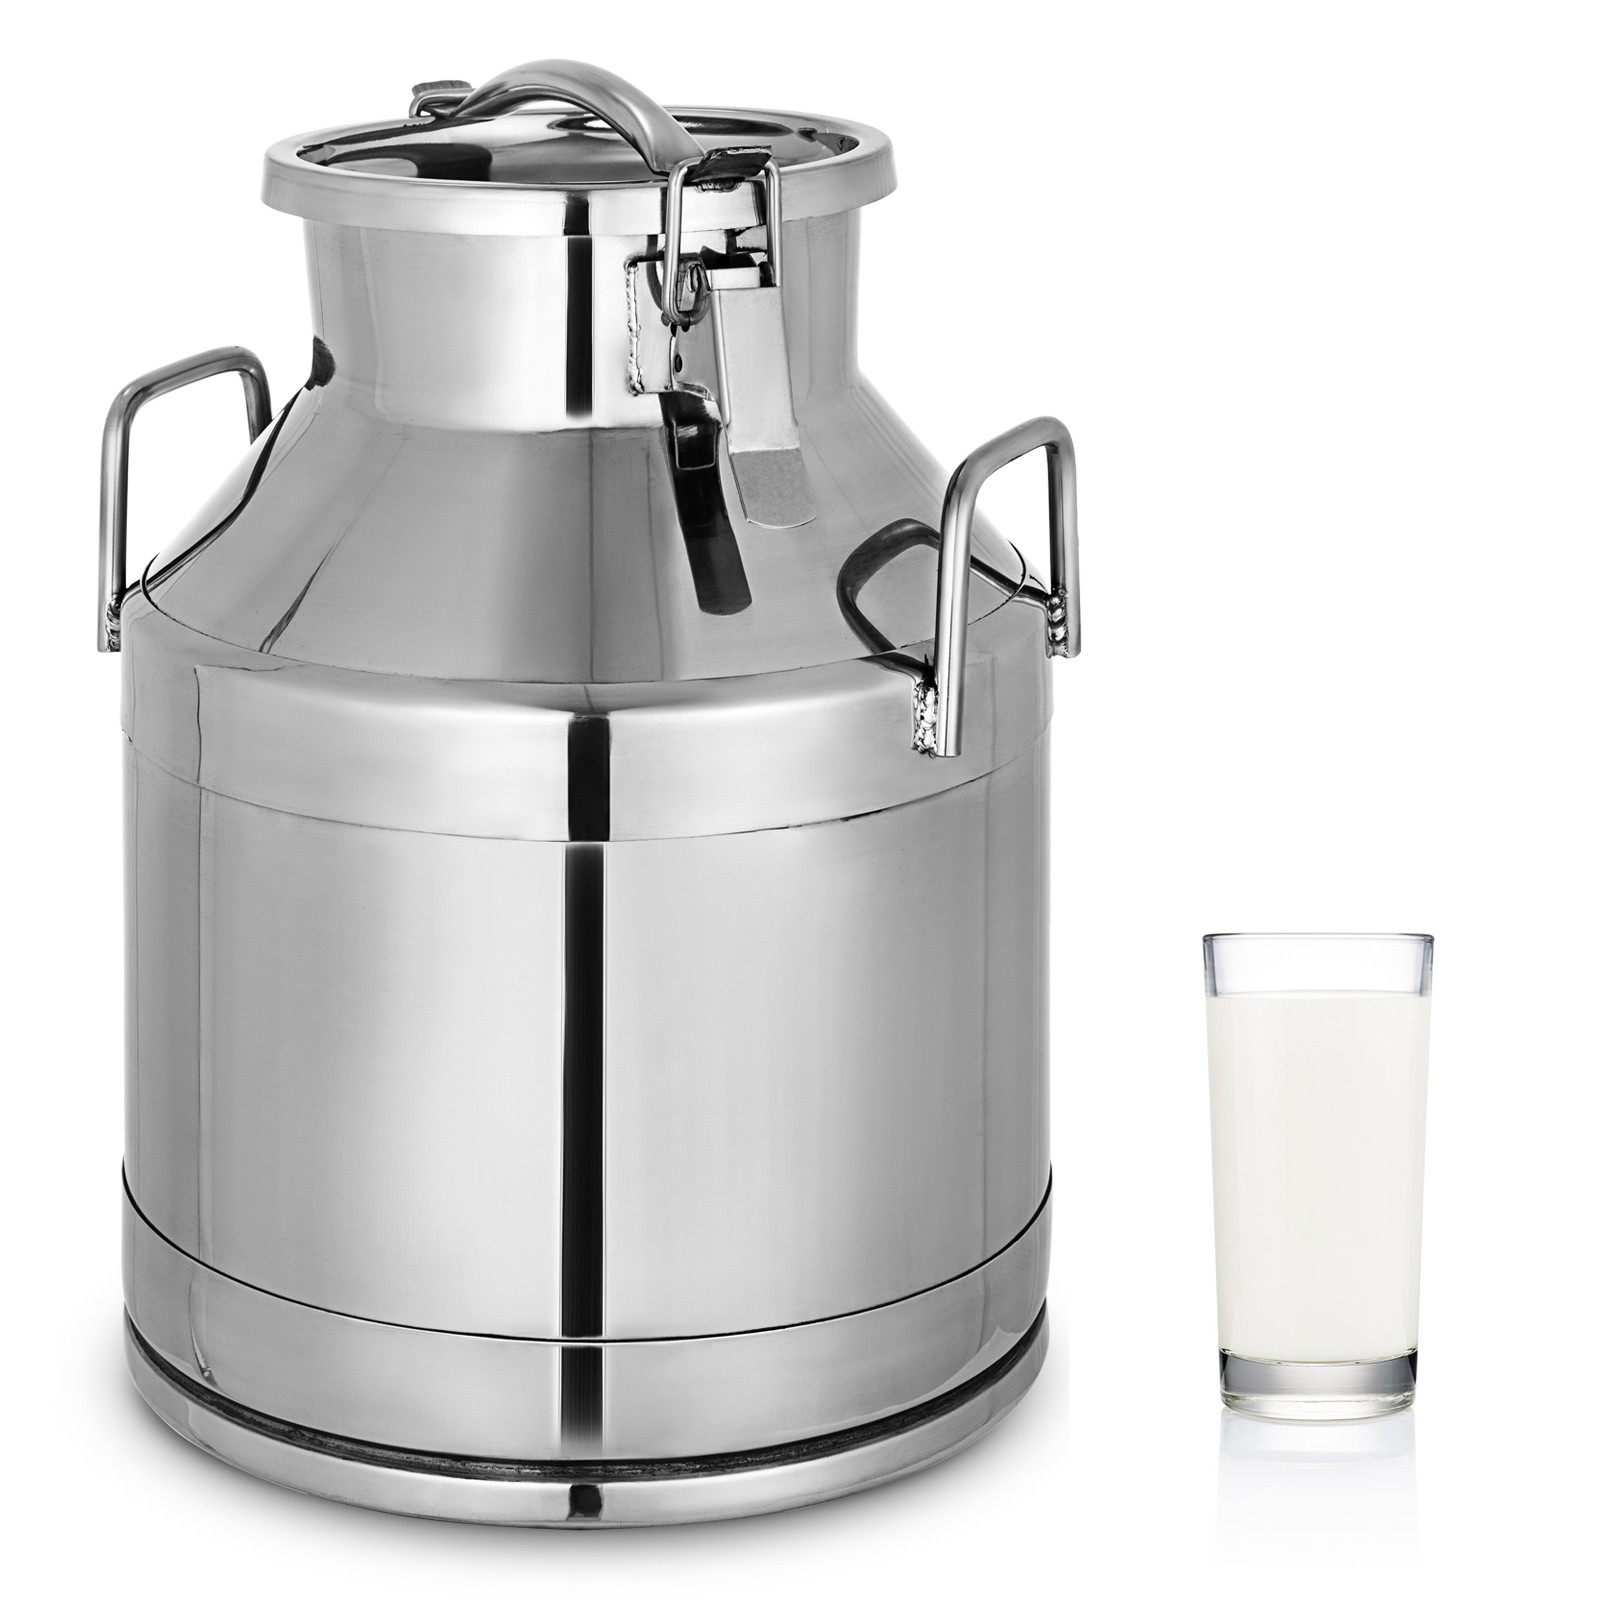 20 Gallon Stainless Steel Milk Can